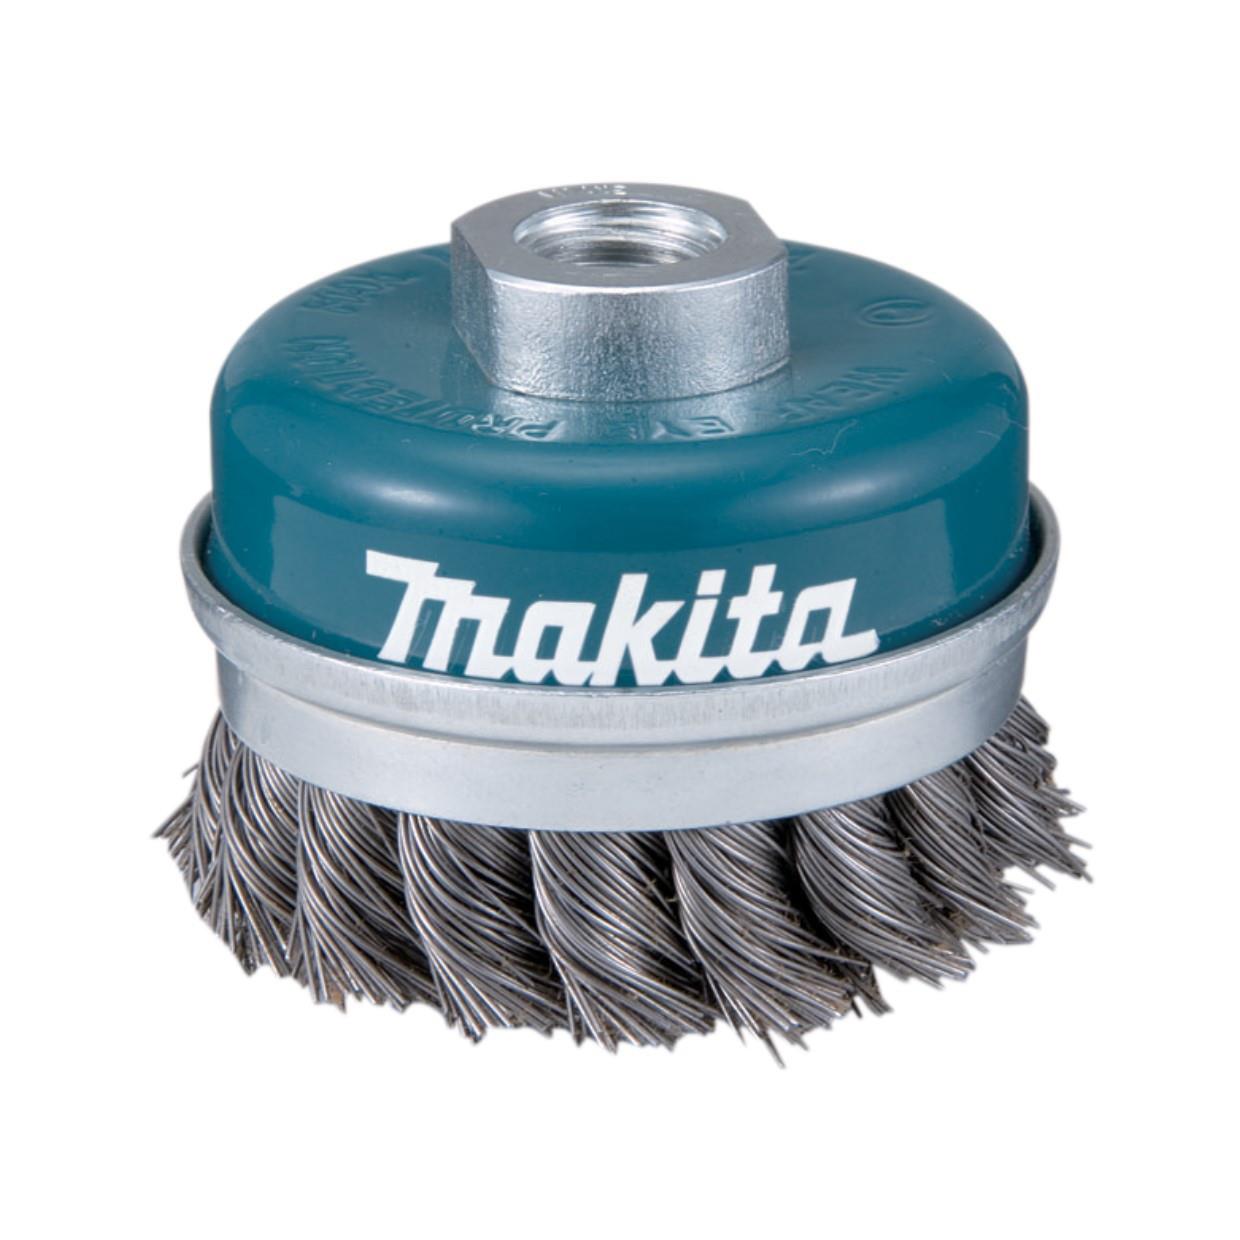 Makita D-24153 Knotted Wire Cup 2 Brush; For Angle Grinder; 60mm Diameter; M14 x 2 Spindle Thread